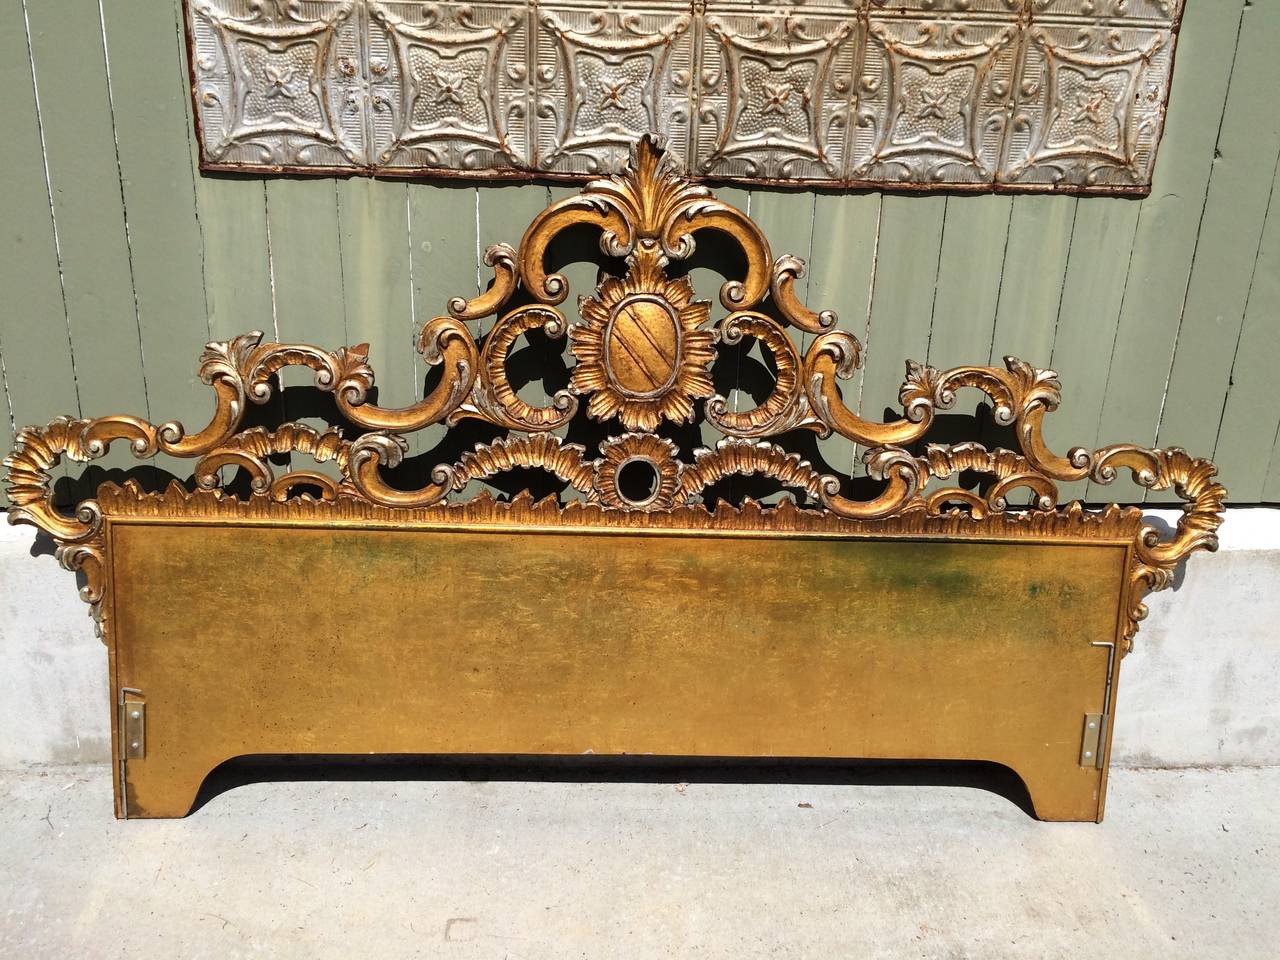 Carved gilt king headboard in gold gilt with silver gilt accents. This regal headboard with crest will make any room majestic. Most likely hand-carved and made in Florence, Italy. Or it could be by Kargas Furniture Company. The headboard attaches